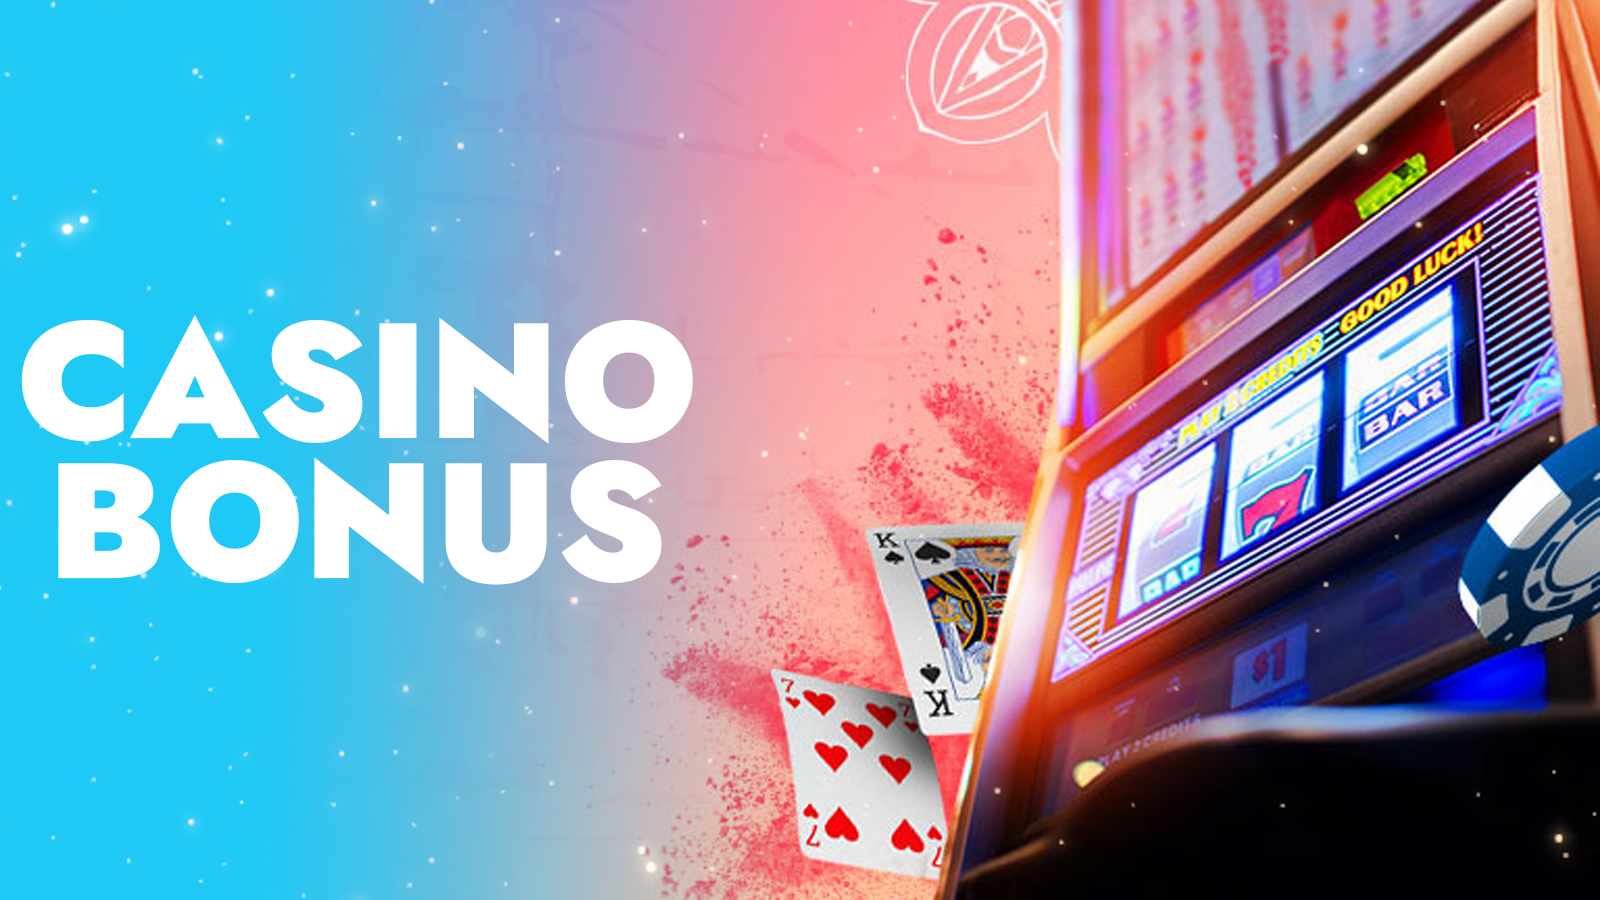 Top up your 10cric account and receive the welcome bonus on slots.